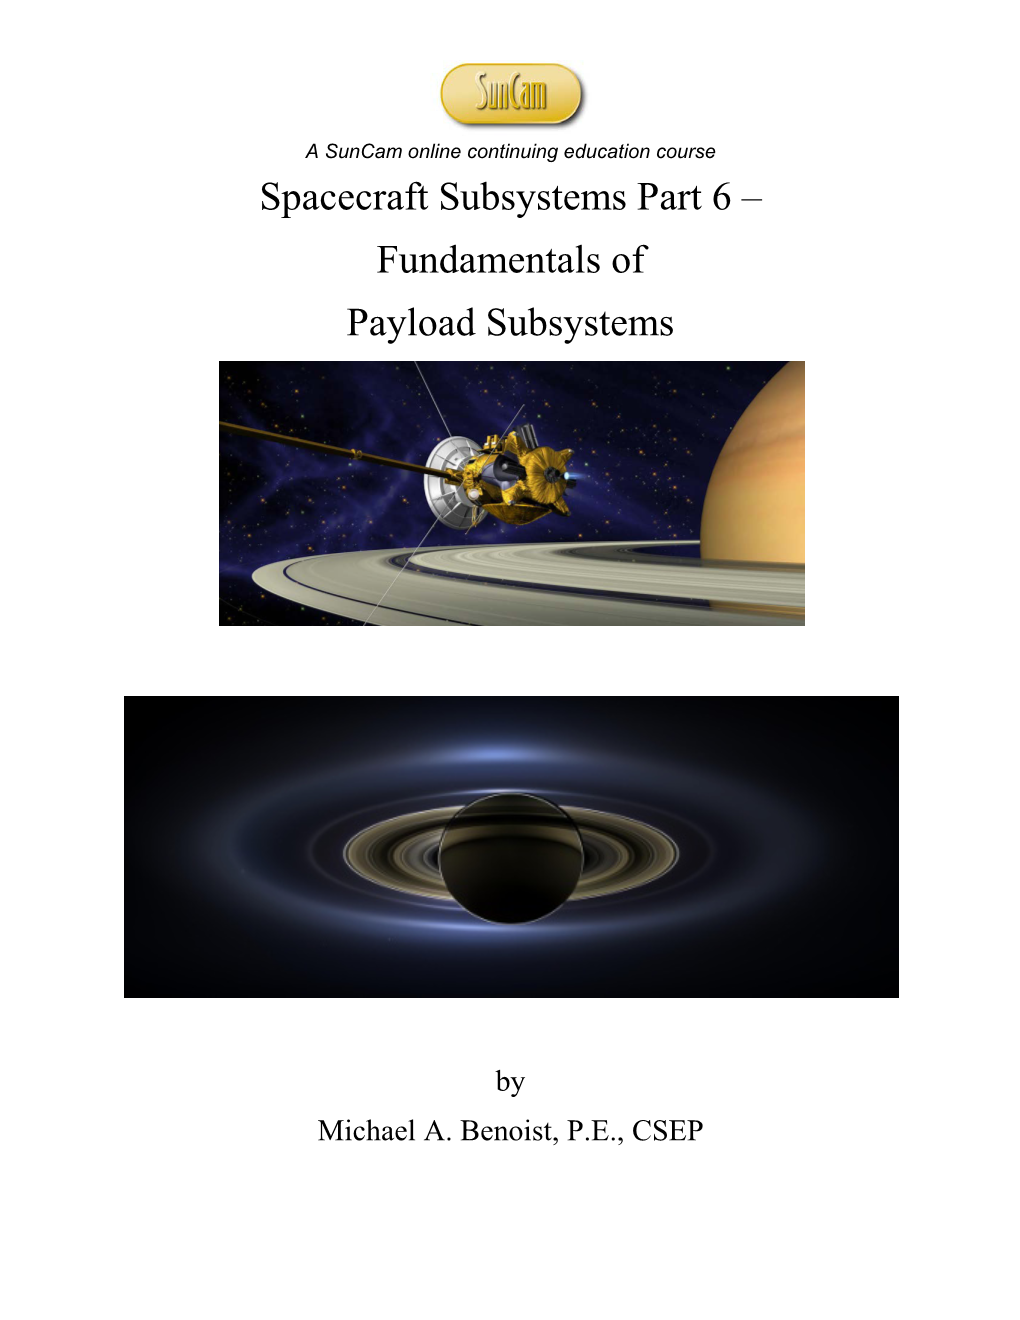 Spacecraft Subsystems Part 6 ‒ Fundamentals of Payload Subsystems